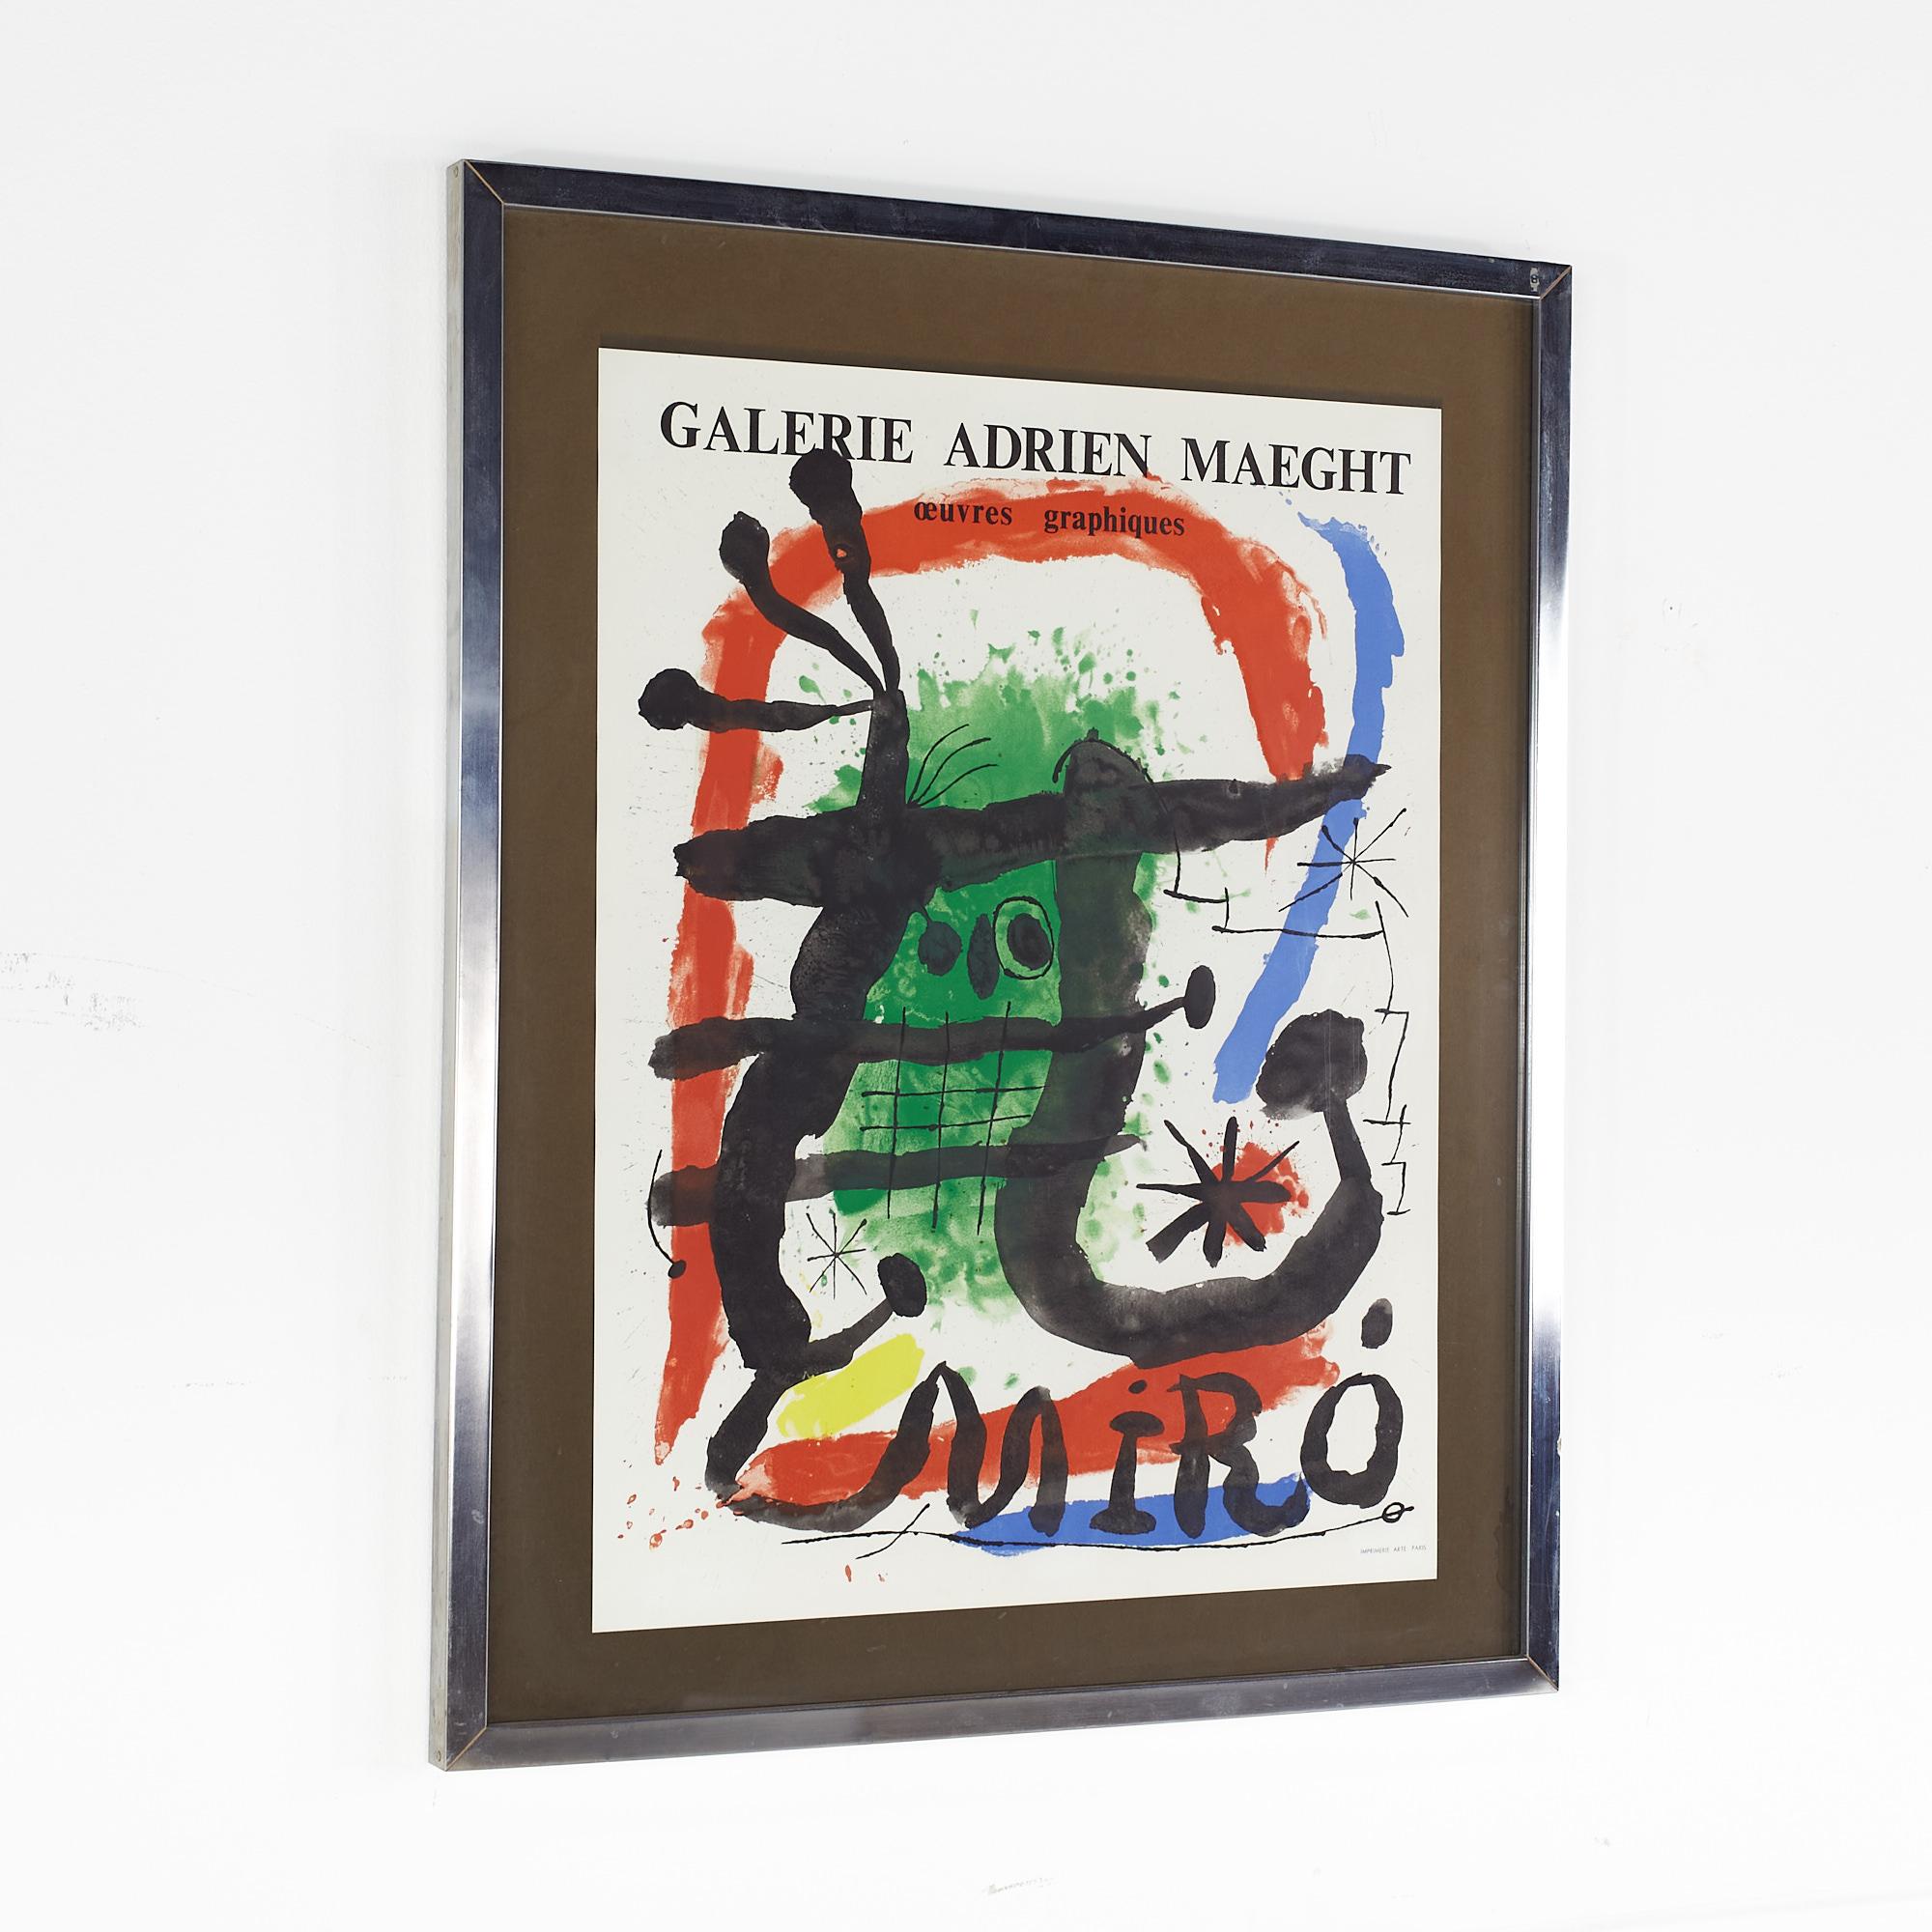 Miro Alcohol de Menthe Mid Century Galerie Adrien Maeght Art Poster

This framed art poster measures: 25 wide x 1 deep x 31 inches high

This piece is in Great Vintage Condition with some scuffing on frame, minor marks, dents, and wear.

We